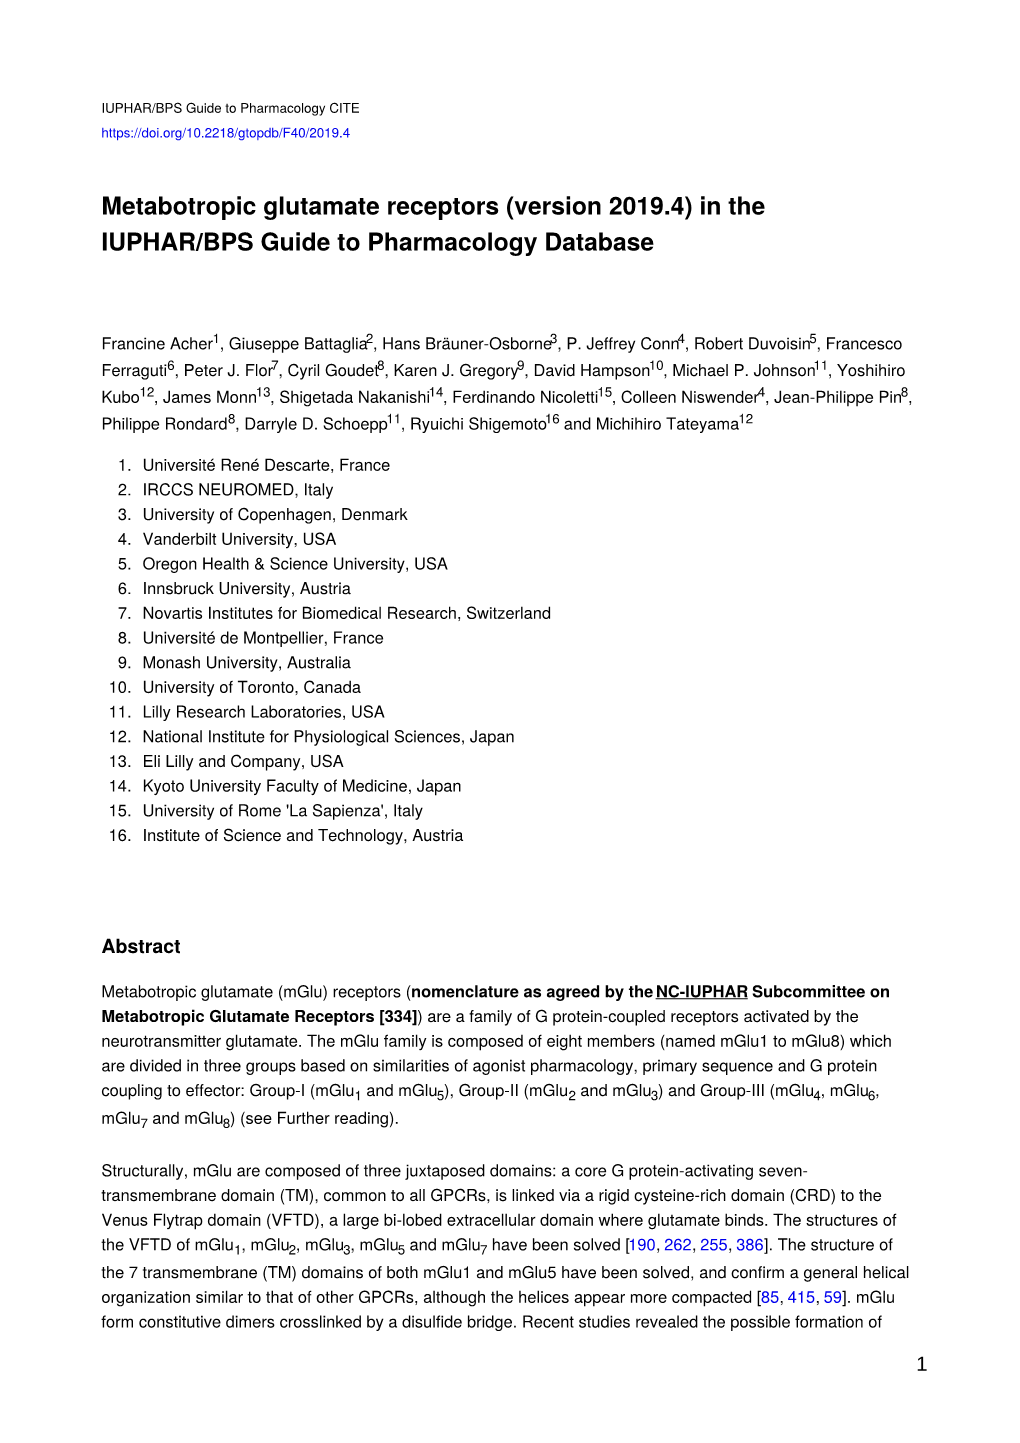 Metabotropic Glutamate Receptors (Version 2019.4) in the IUPHAR/BPS Guide to Pharmacology Database